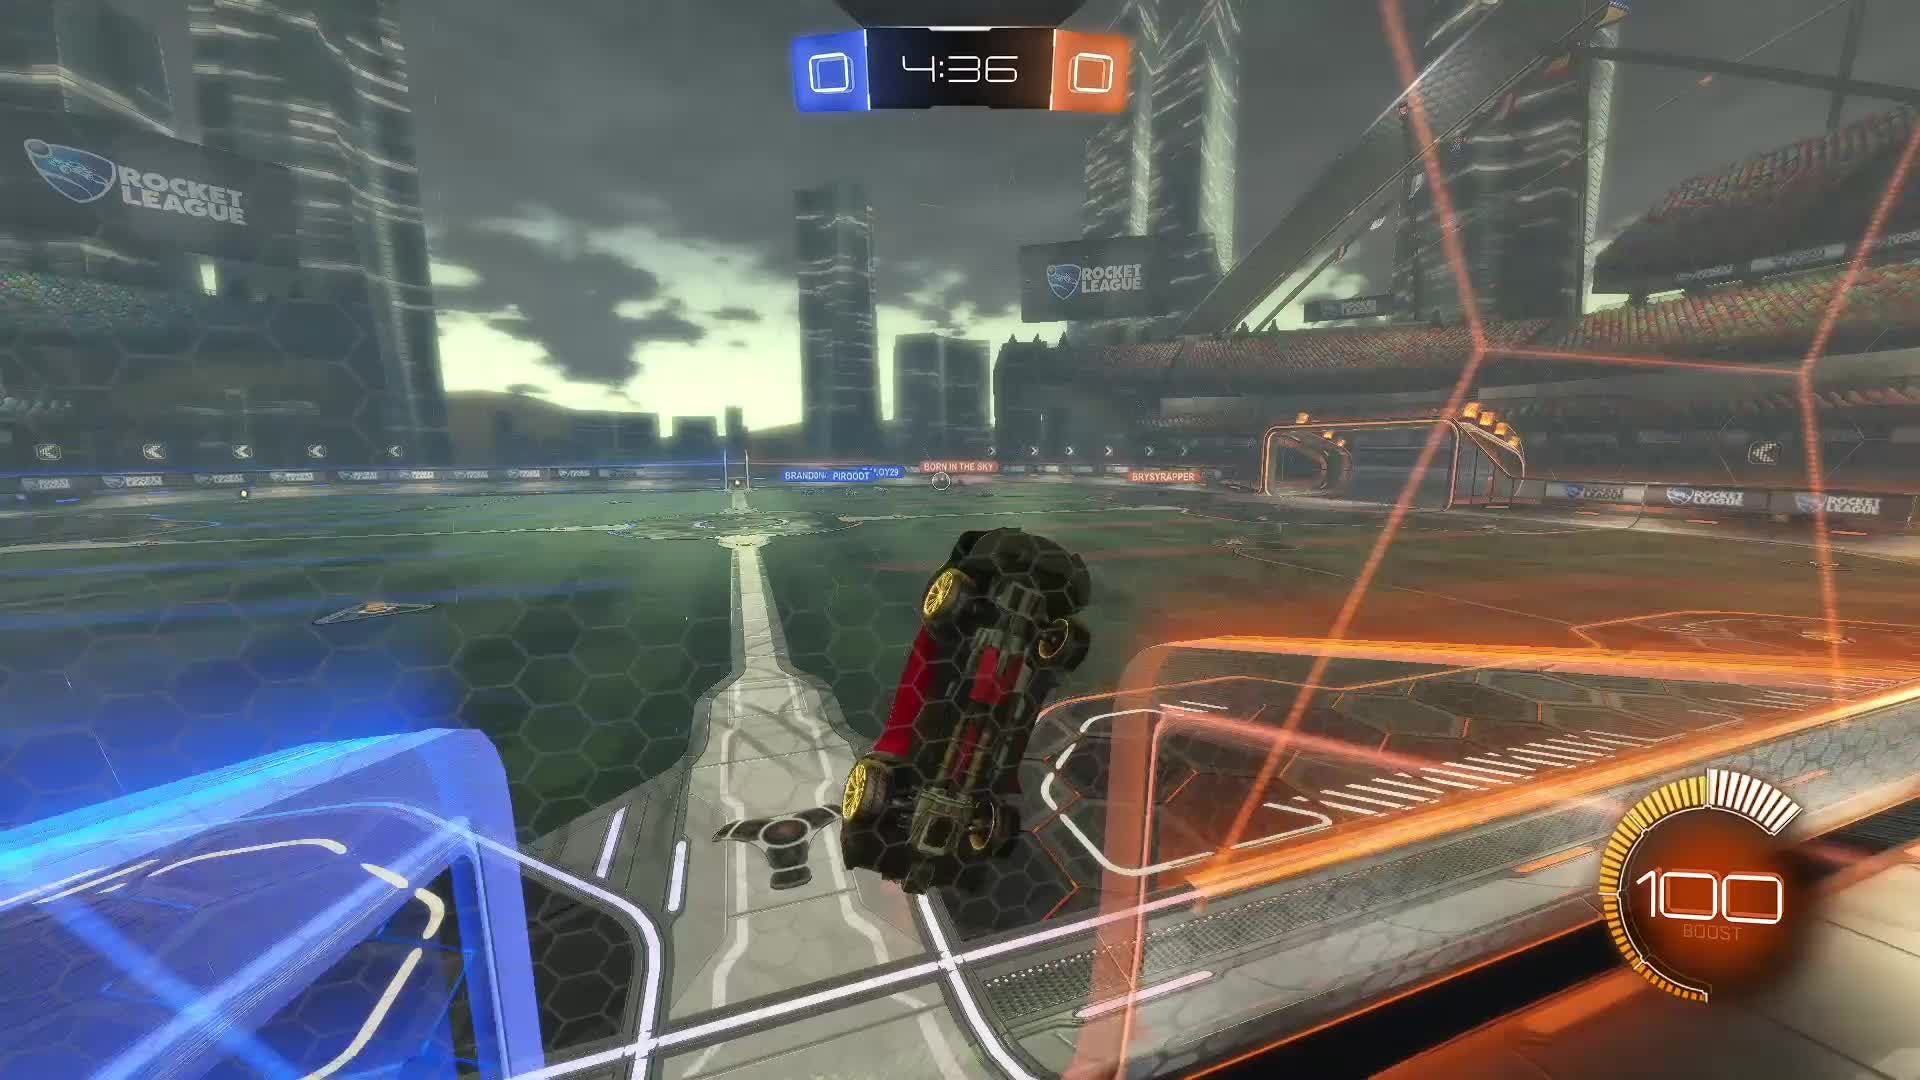 Rocket League: General - So I did a thing... video cover image 0